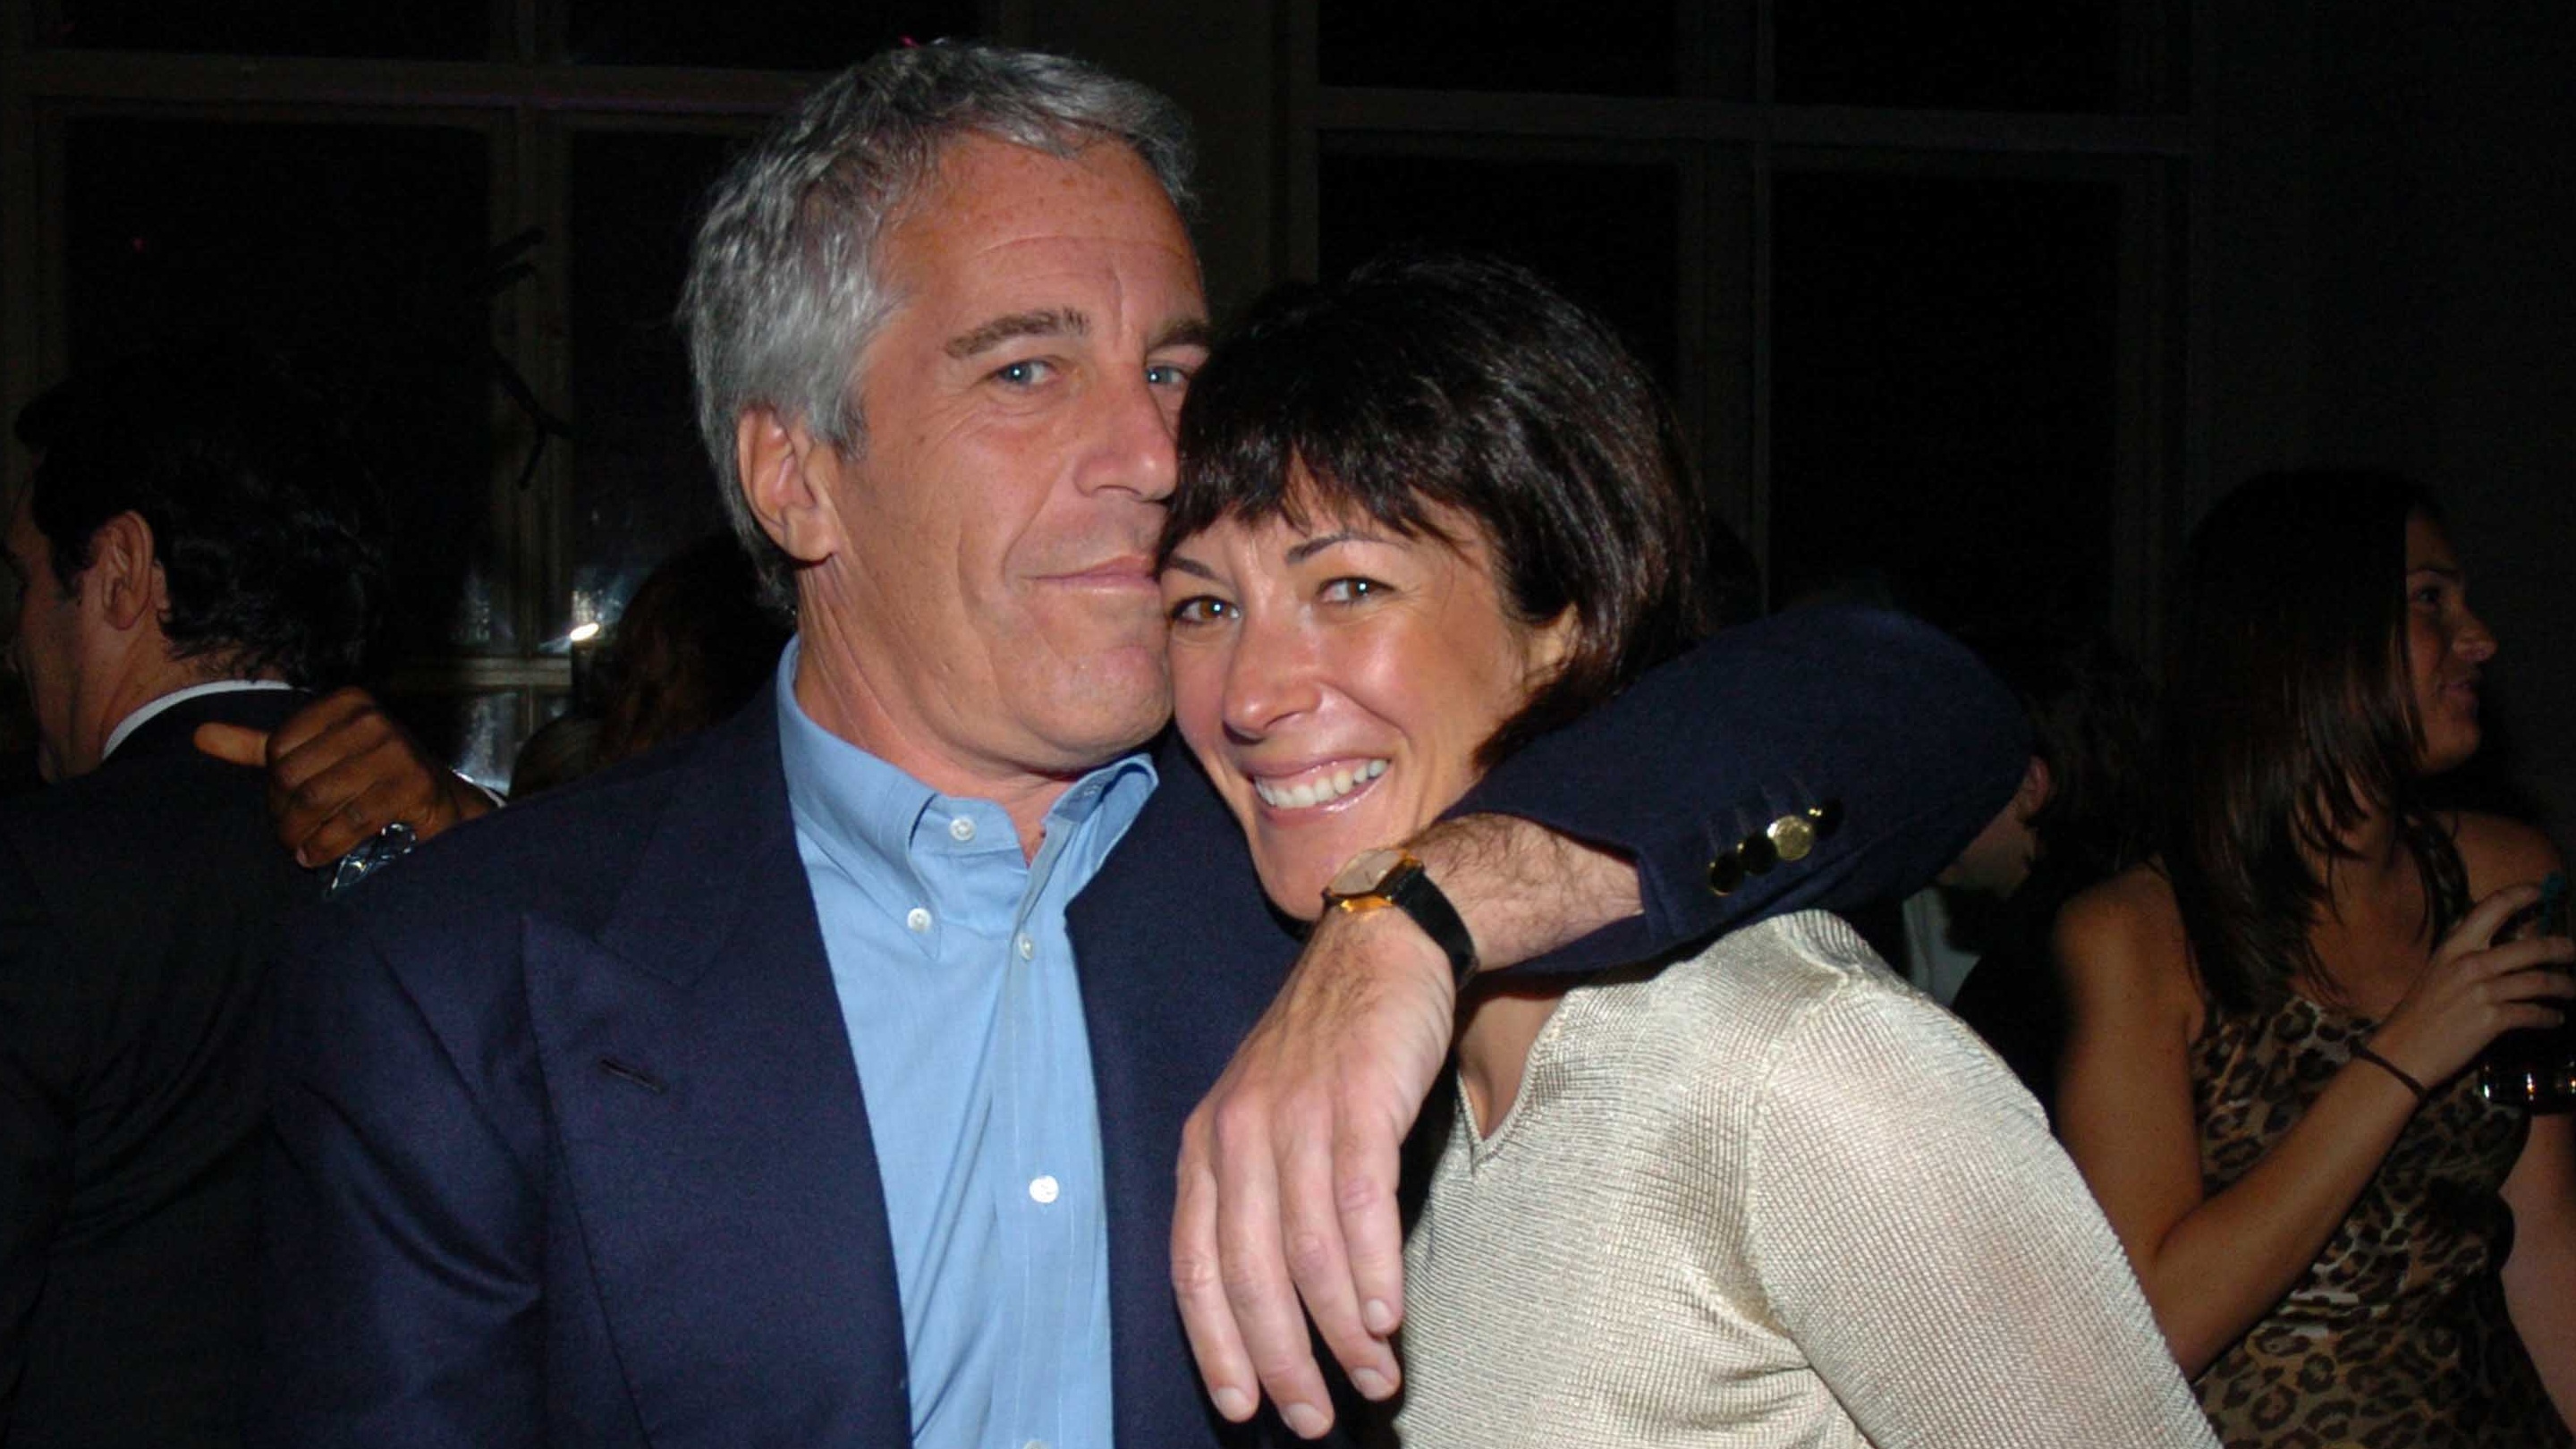 Jeffrey Epstein and Ghislaine Maxwell pictured together in 2005